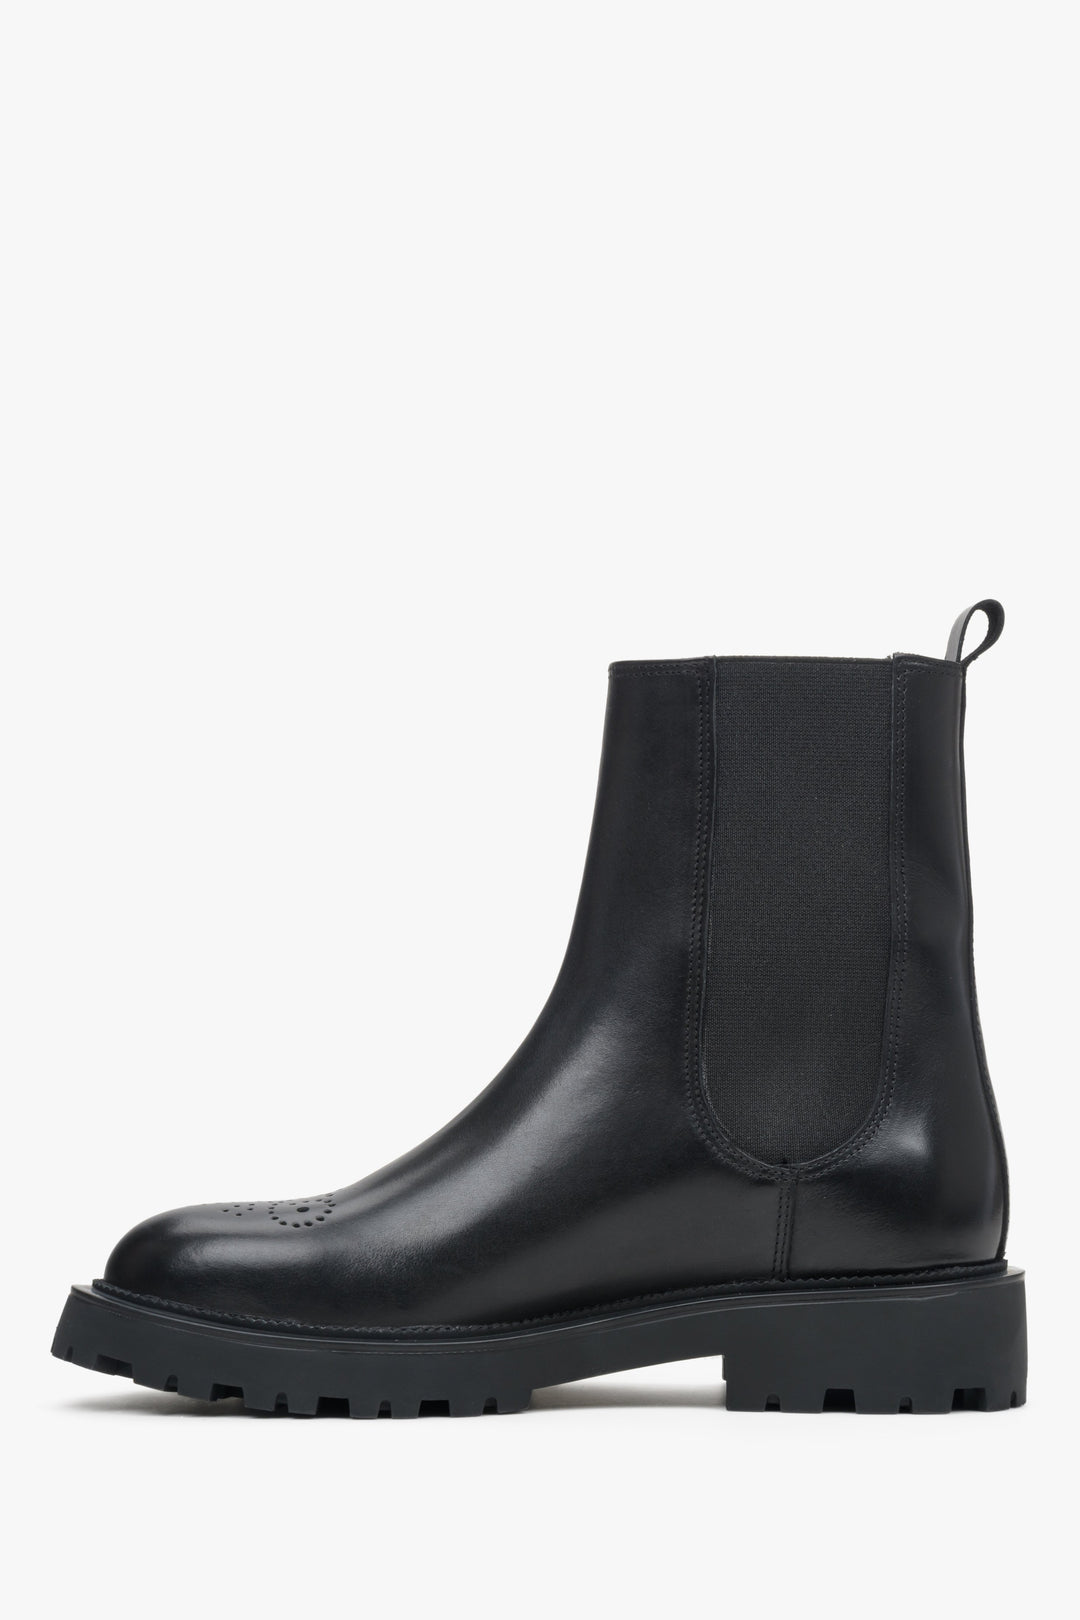 Women's black leather ankle boots - profile view of the Estro brand boot.